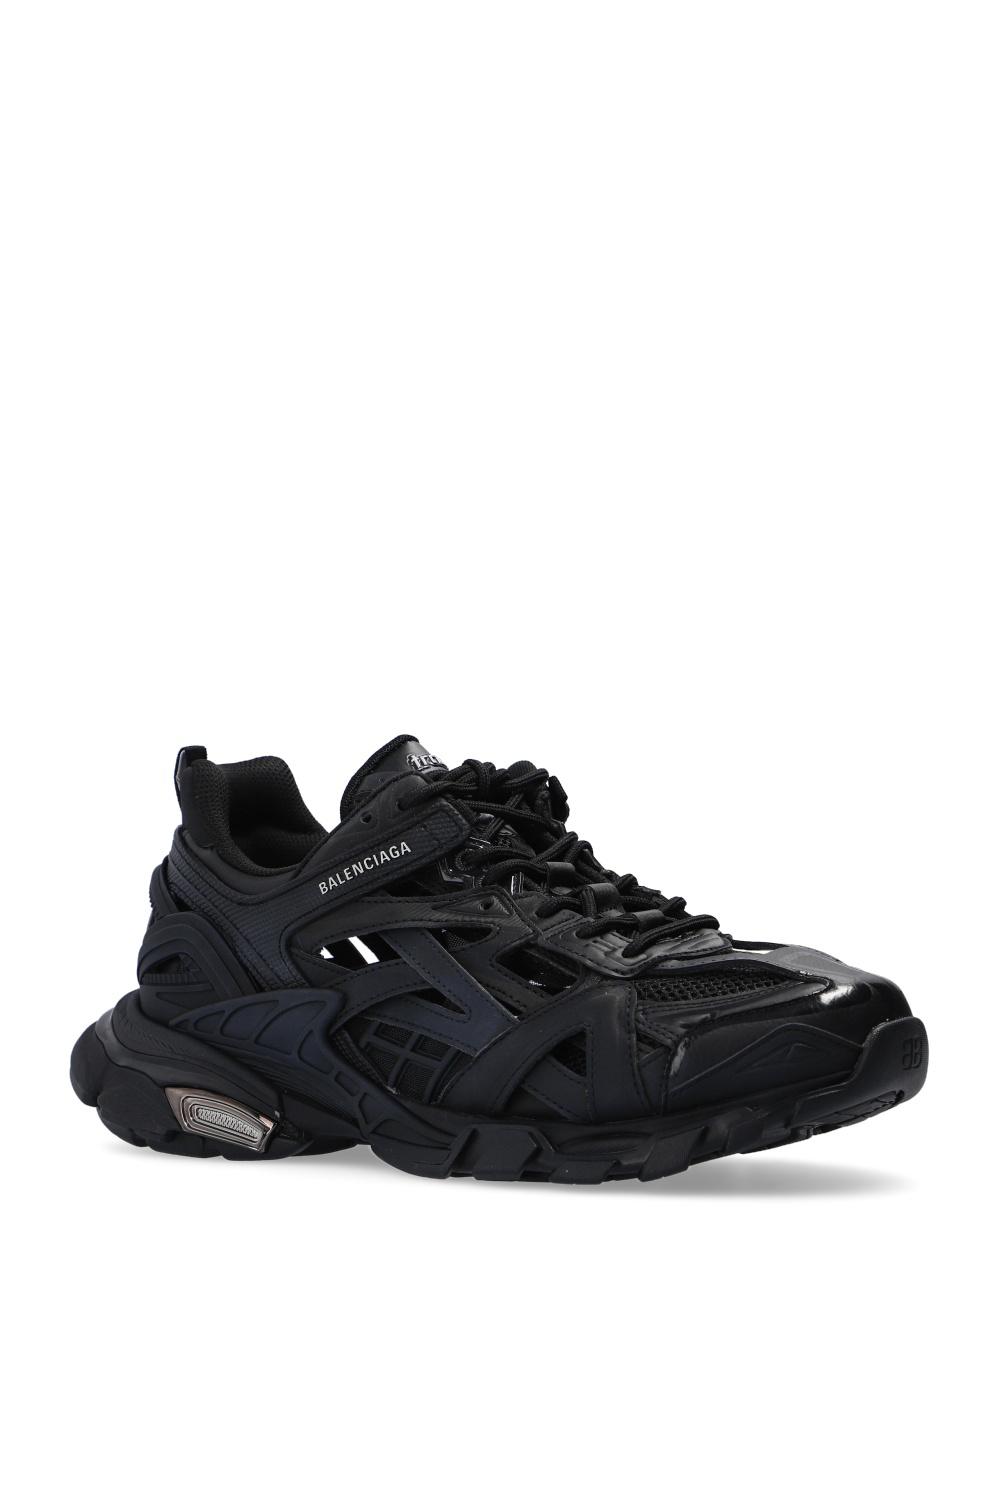 Balenciaga Black Track Trainers for Save 18% - Lyst